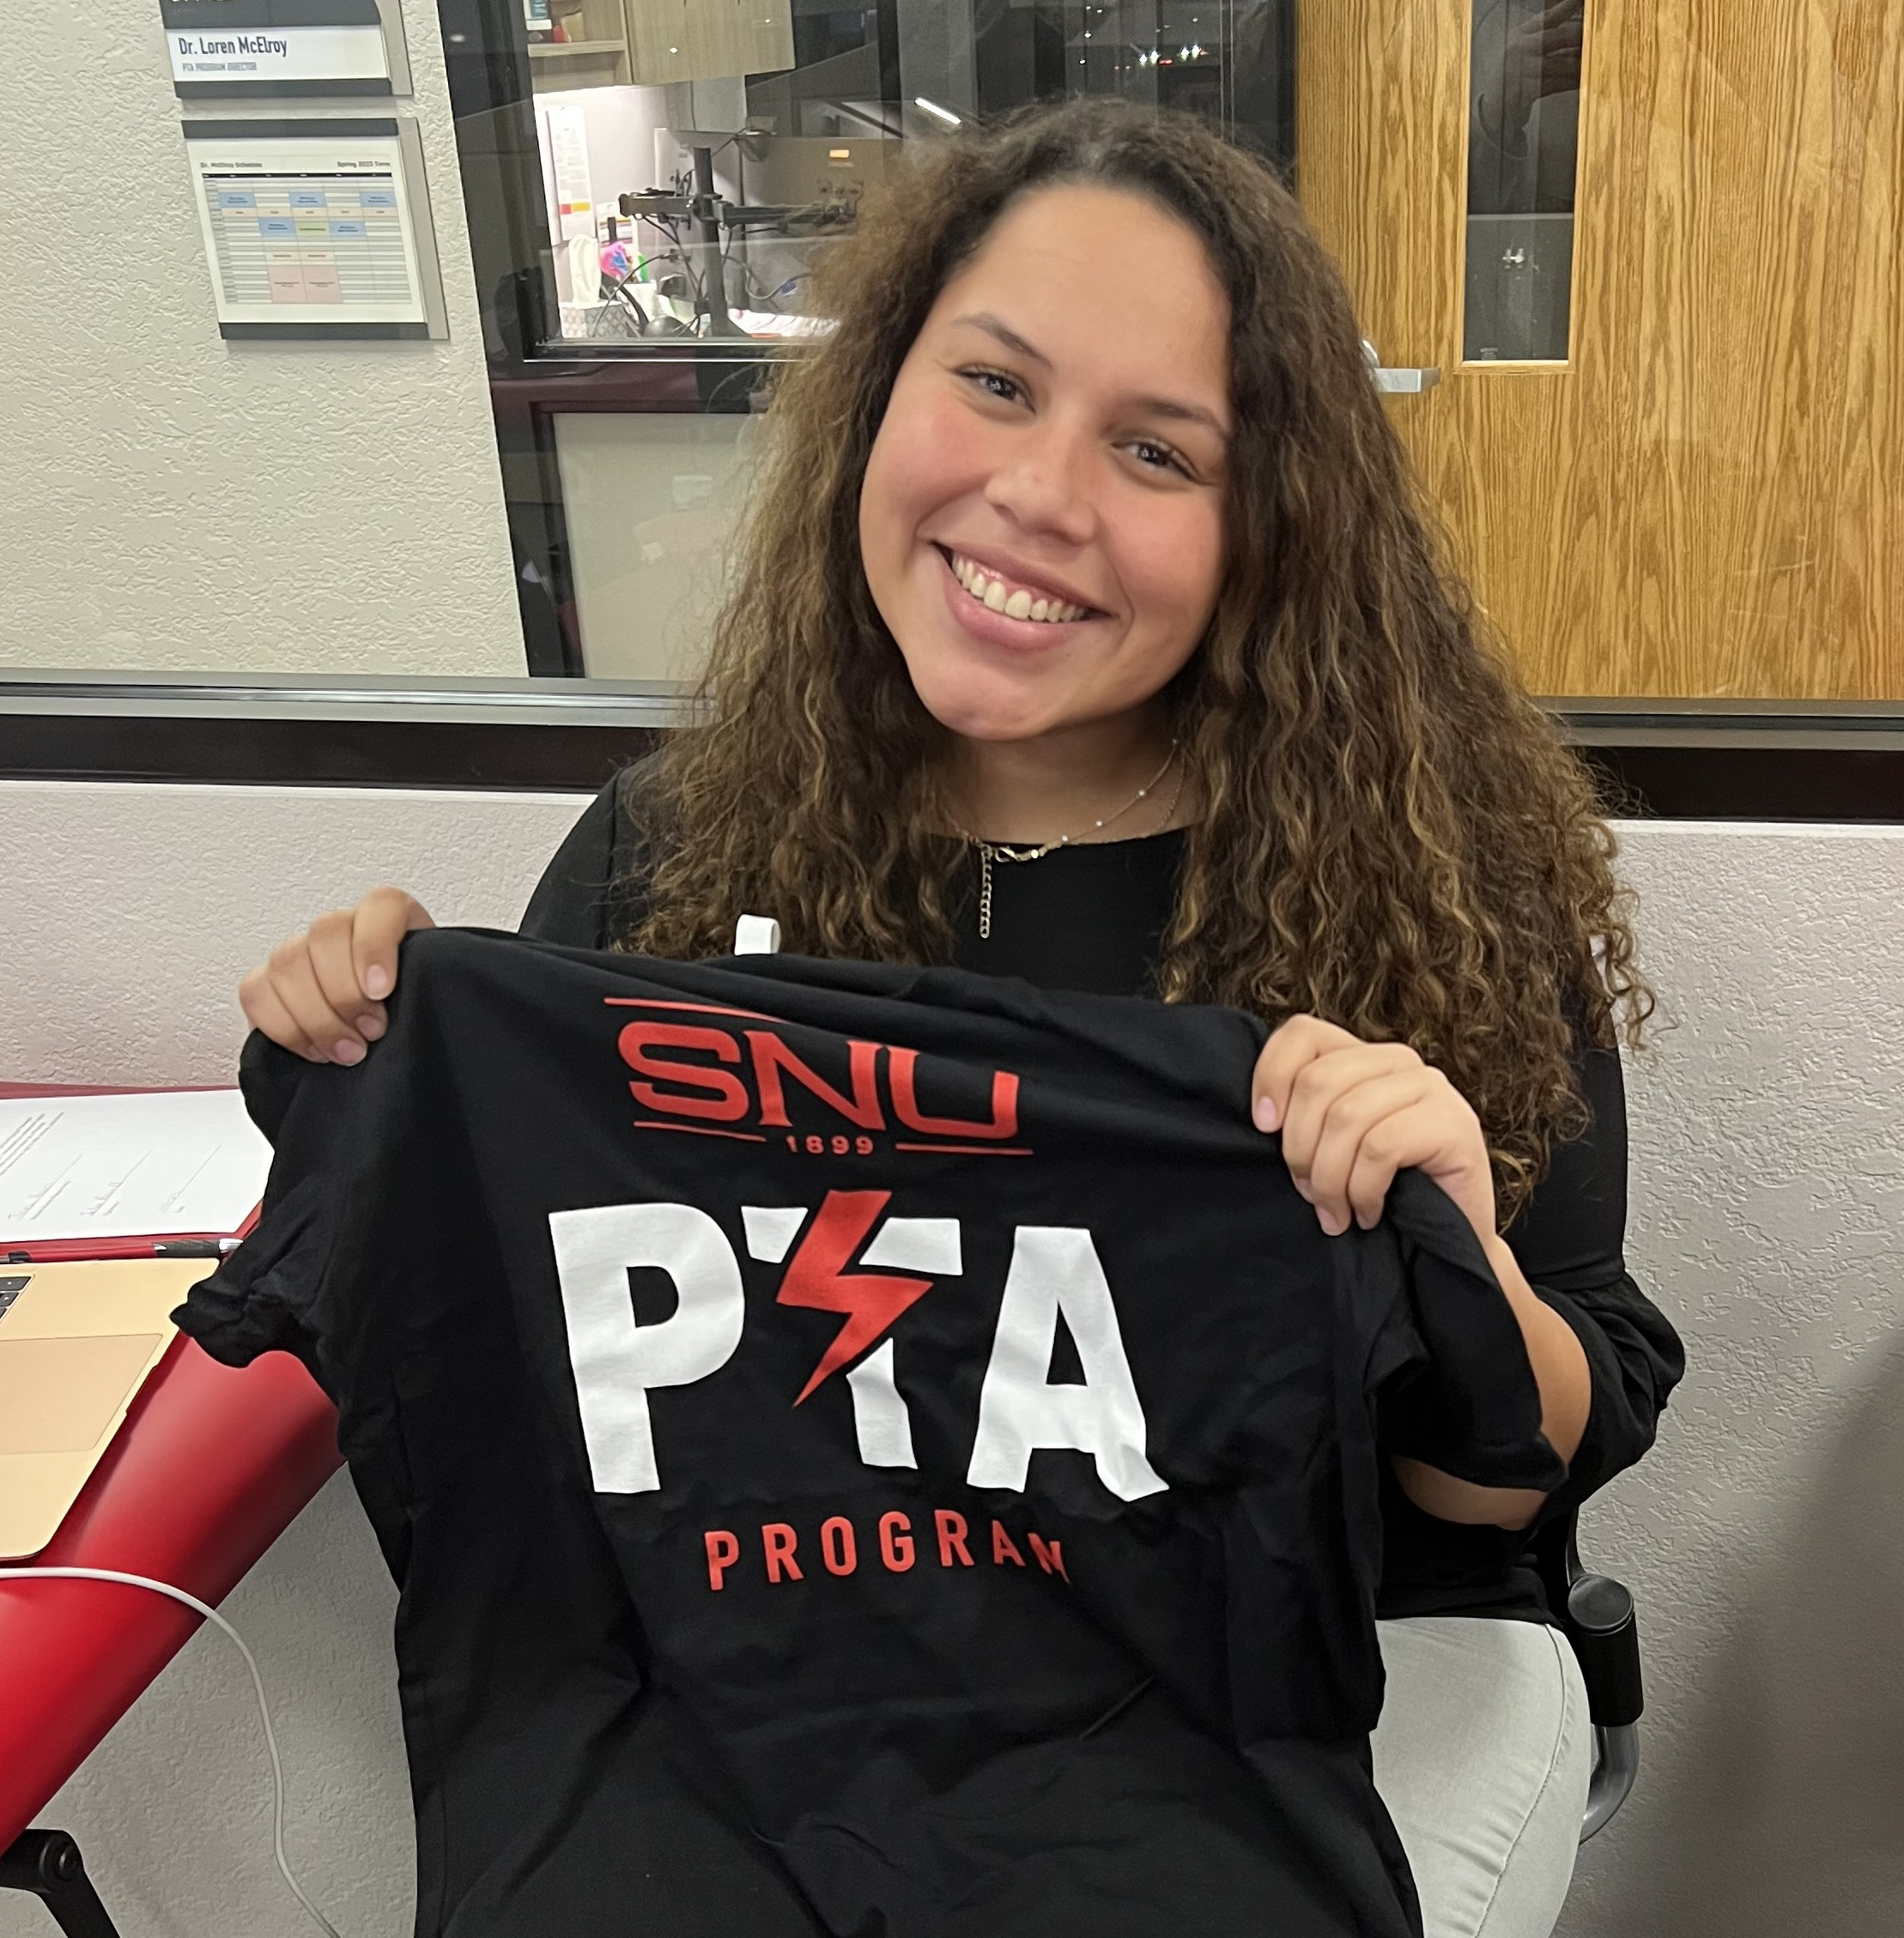 Talea Powell holding shirt from SNU's PTA (Physical Therapist Assistant) program